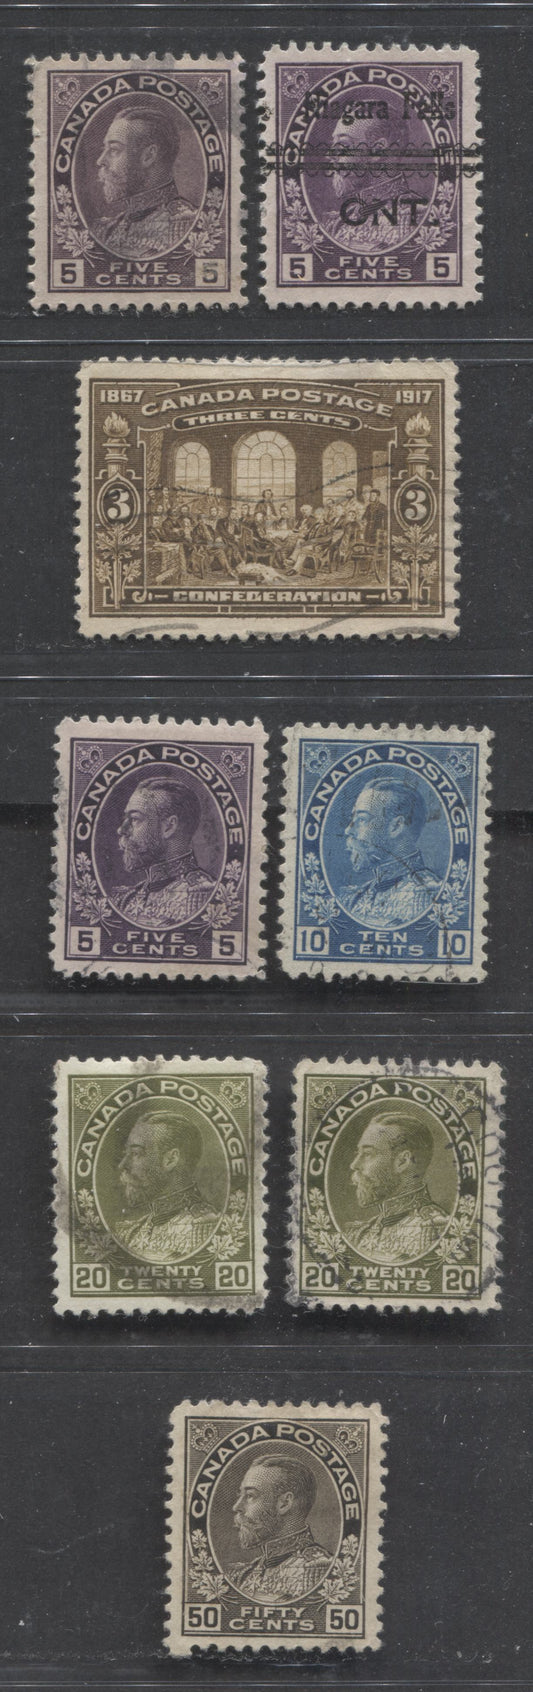 Lot 280 Canada #112a, 112i, 112cxx, 119c, 120ii, 135 3c, 5c, 20c, 50c Violet - Brown Black King George V, 1911-1928 Admiral & 50th Anniversary of Confederation Issues, 8 VF Used Singles, Including 5c Violet On Thin Paper & 50c Brown Black Wet Printing